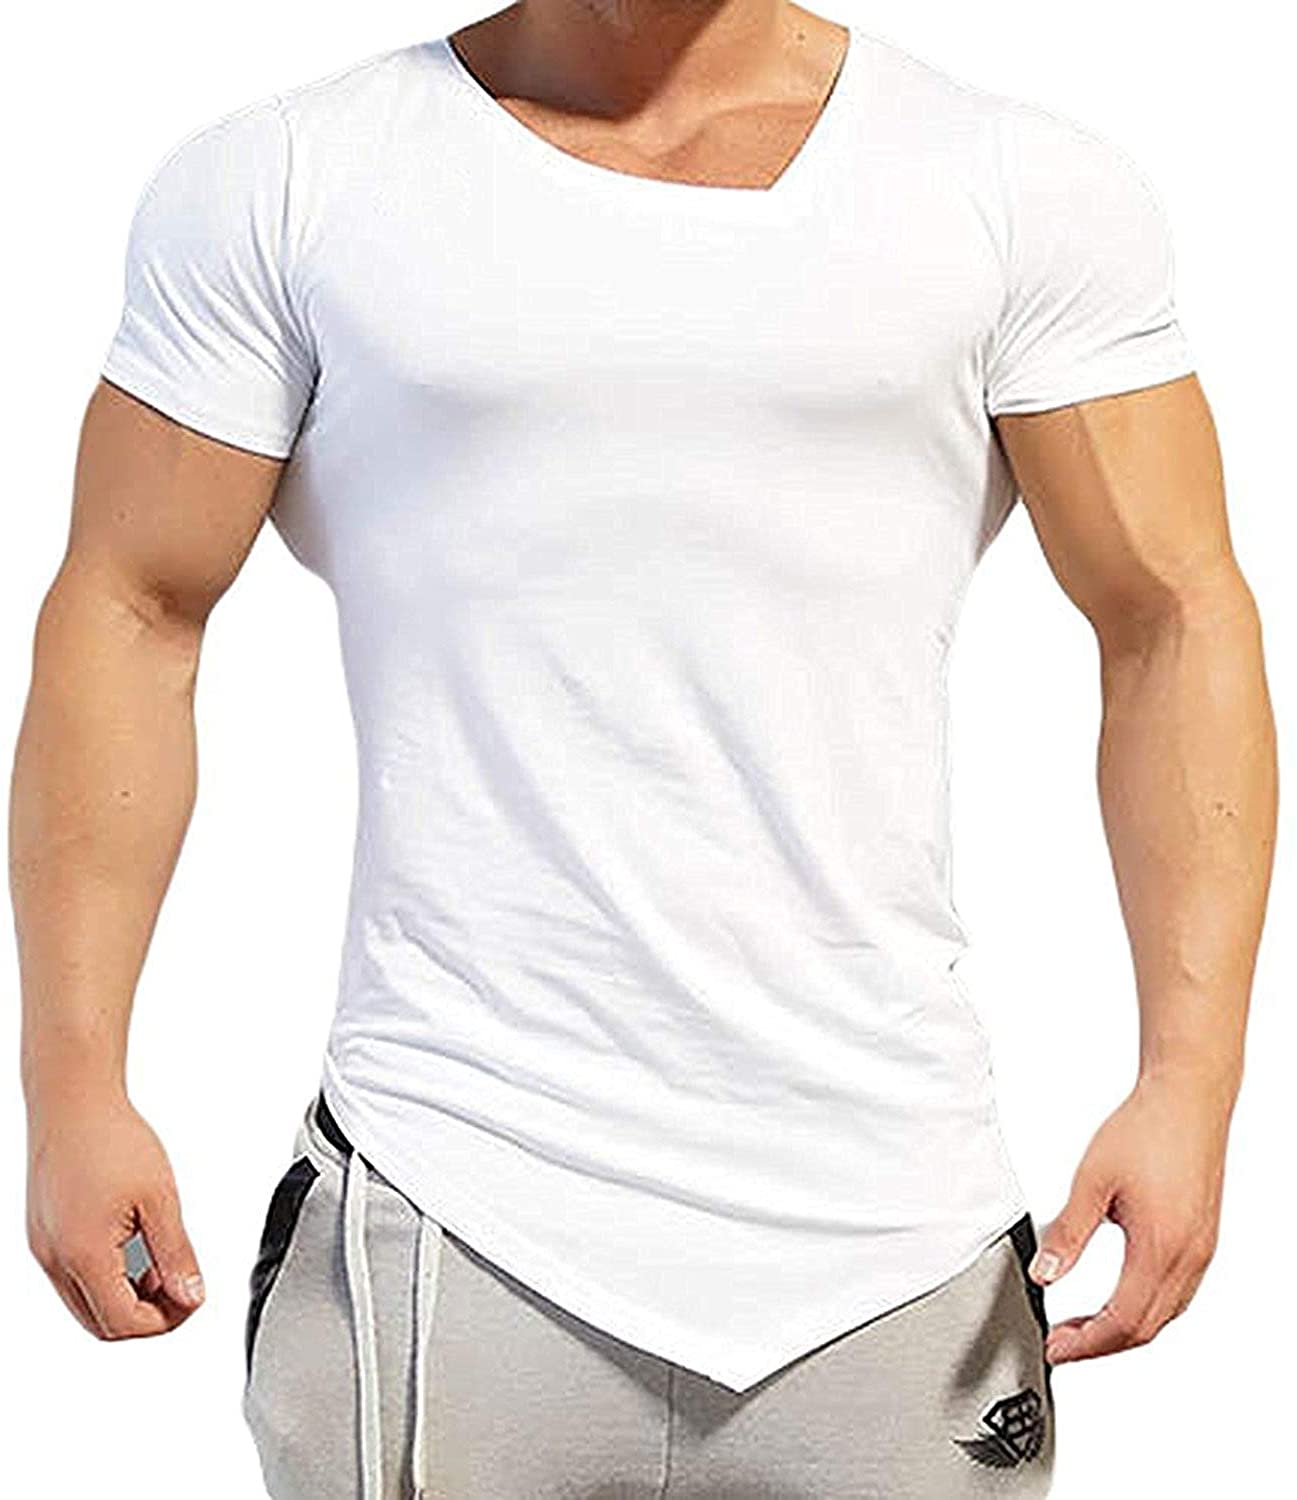 COOFANDY Mens Gym Workout T Shirt Short Sleeve Muscle Cut Bodybuilding Training Fitness Tee Tops